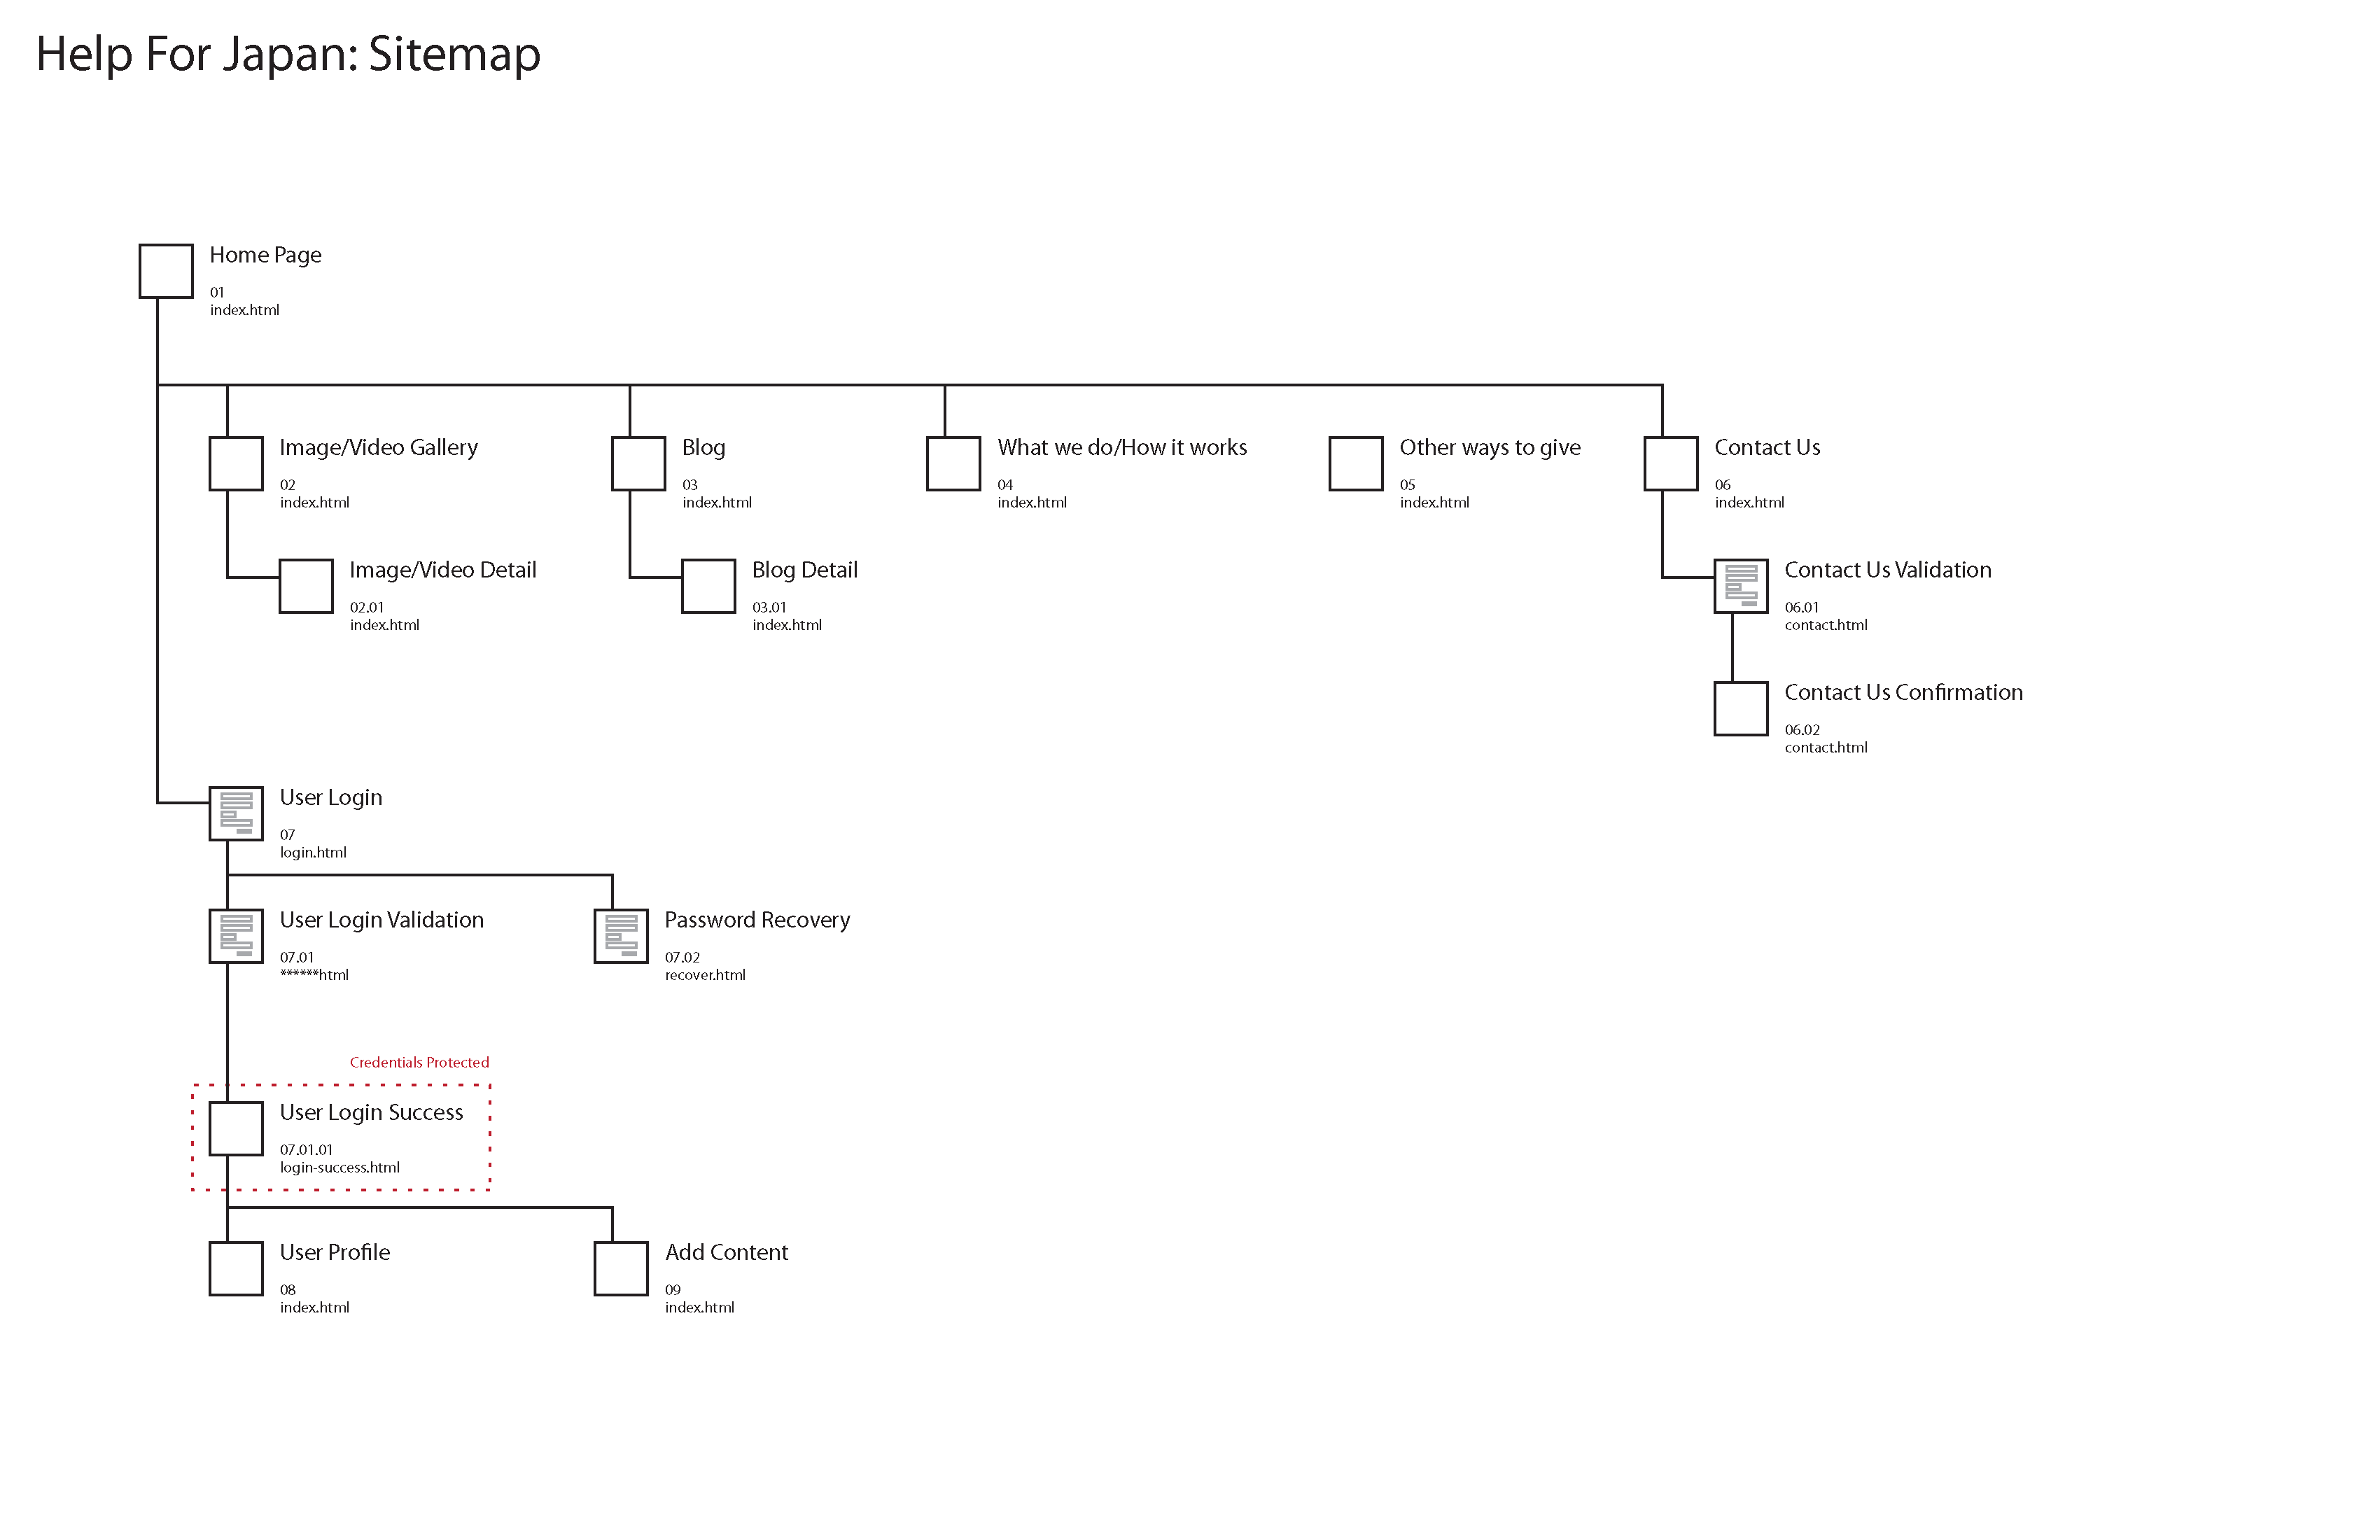 A Rough sitemap outlining how pages related to each other